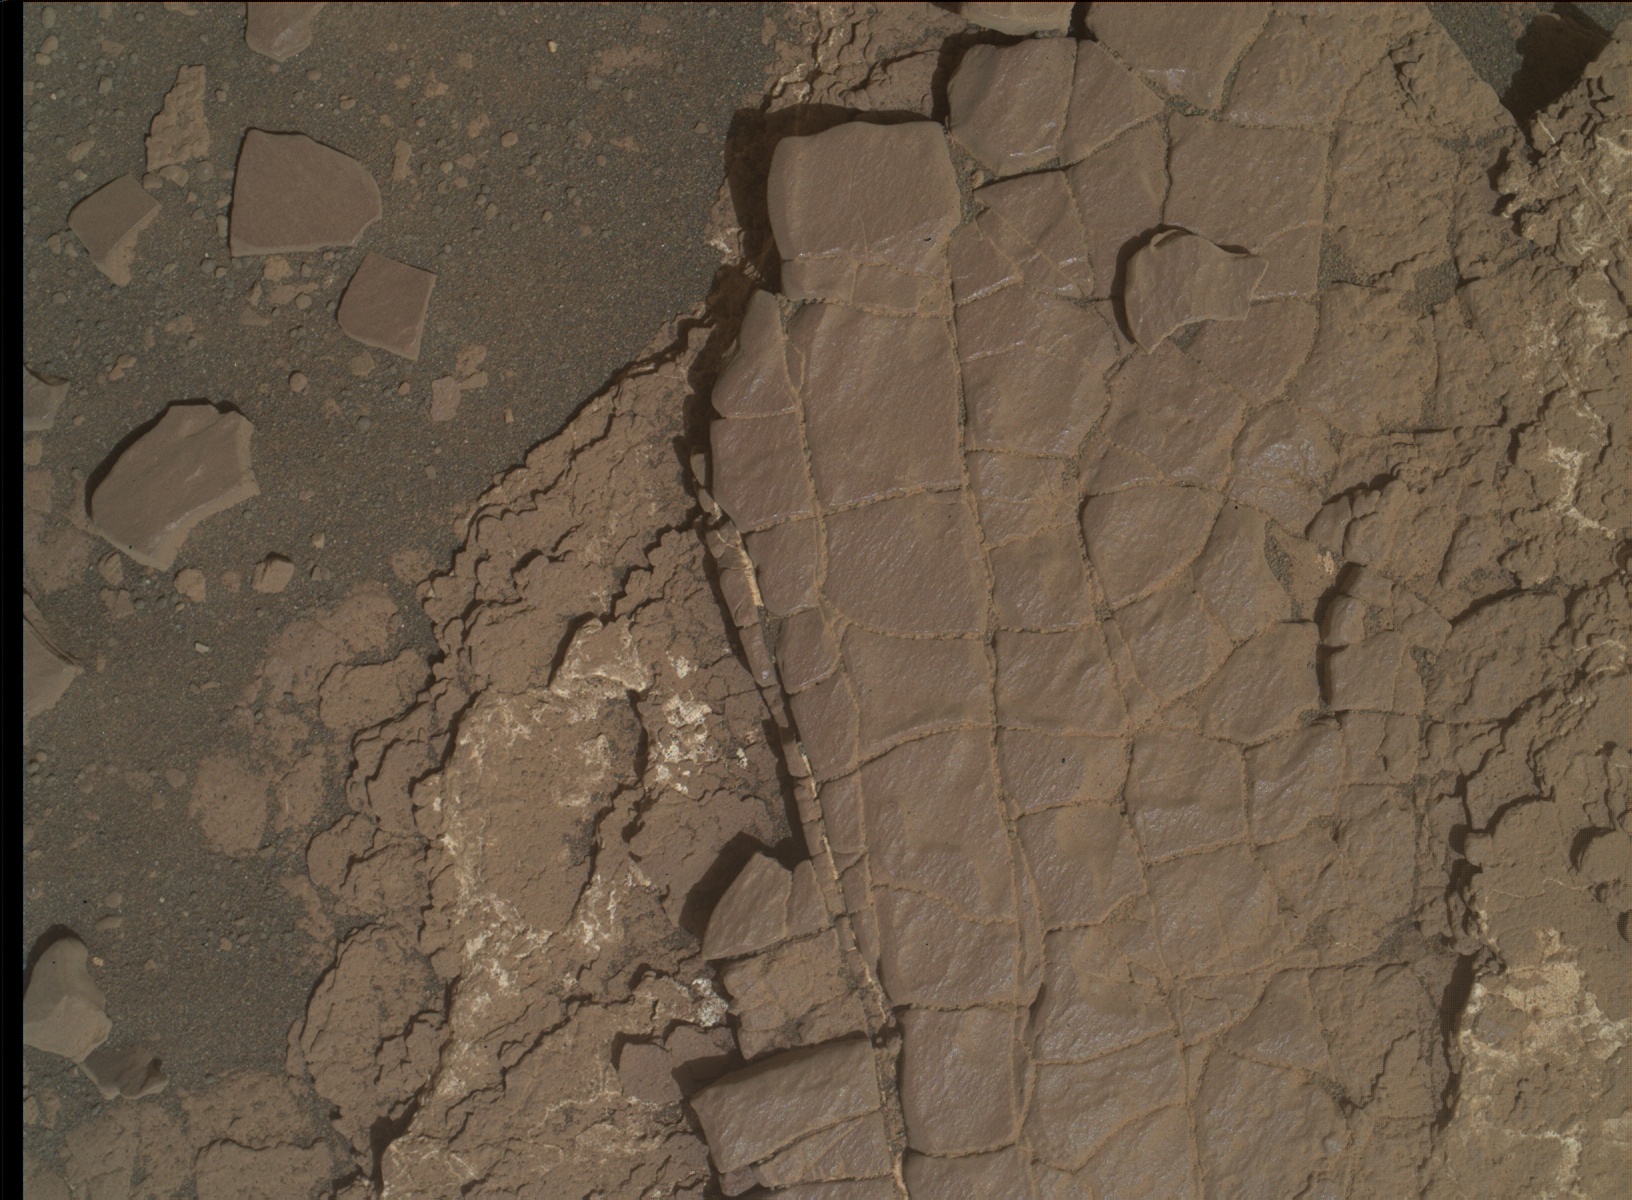 Nasa's Mars rover Curiosity acquired this image using its Mars Hand Lens Imager (MAHLI) on Sol 2422